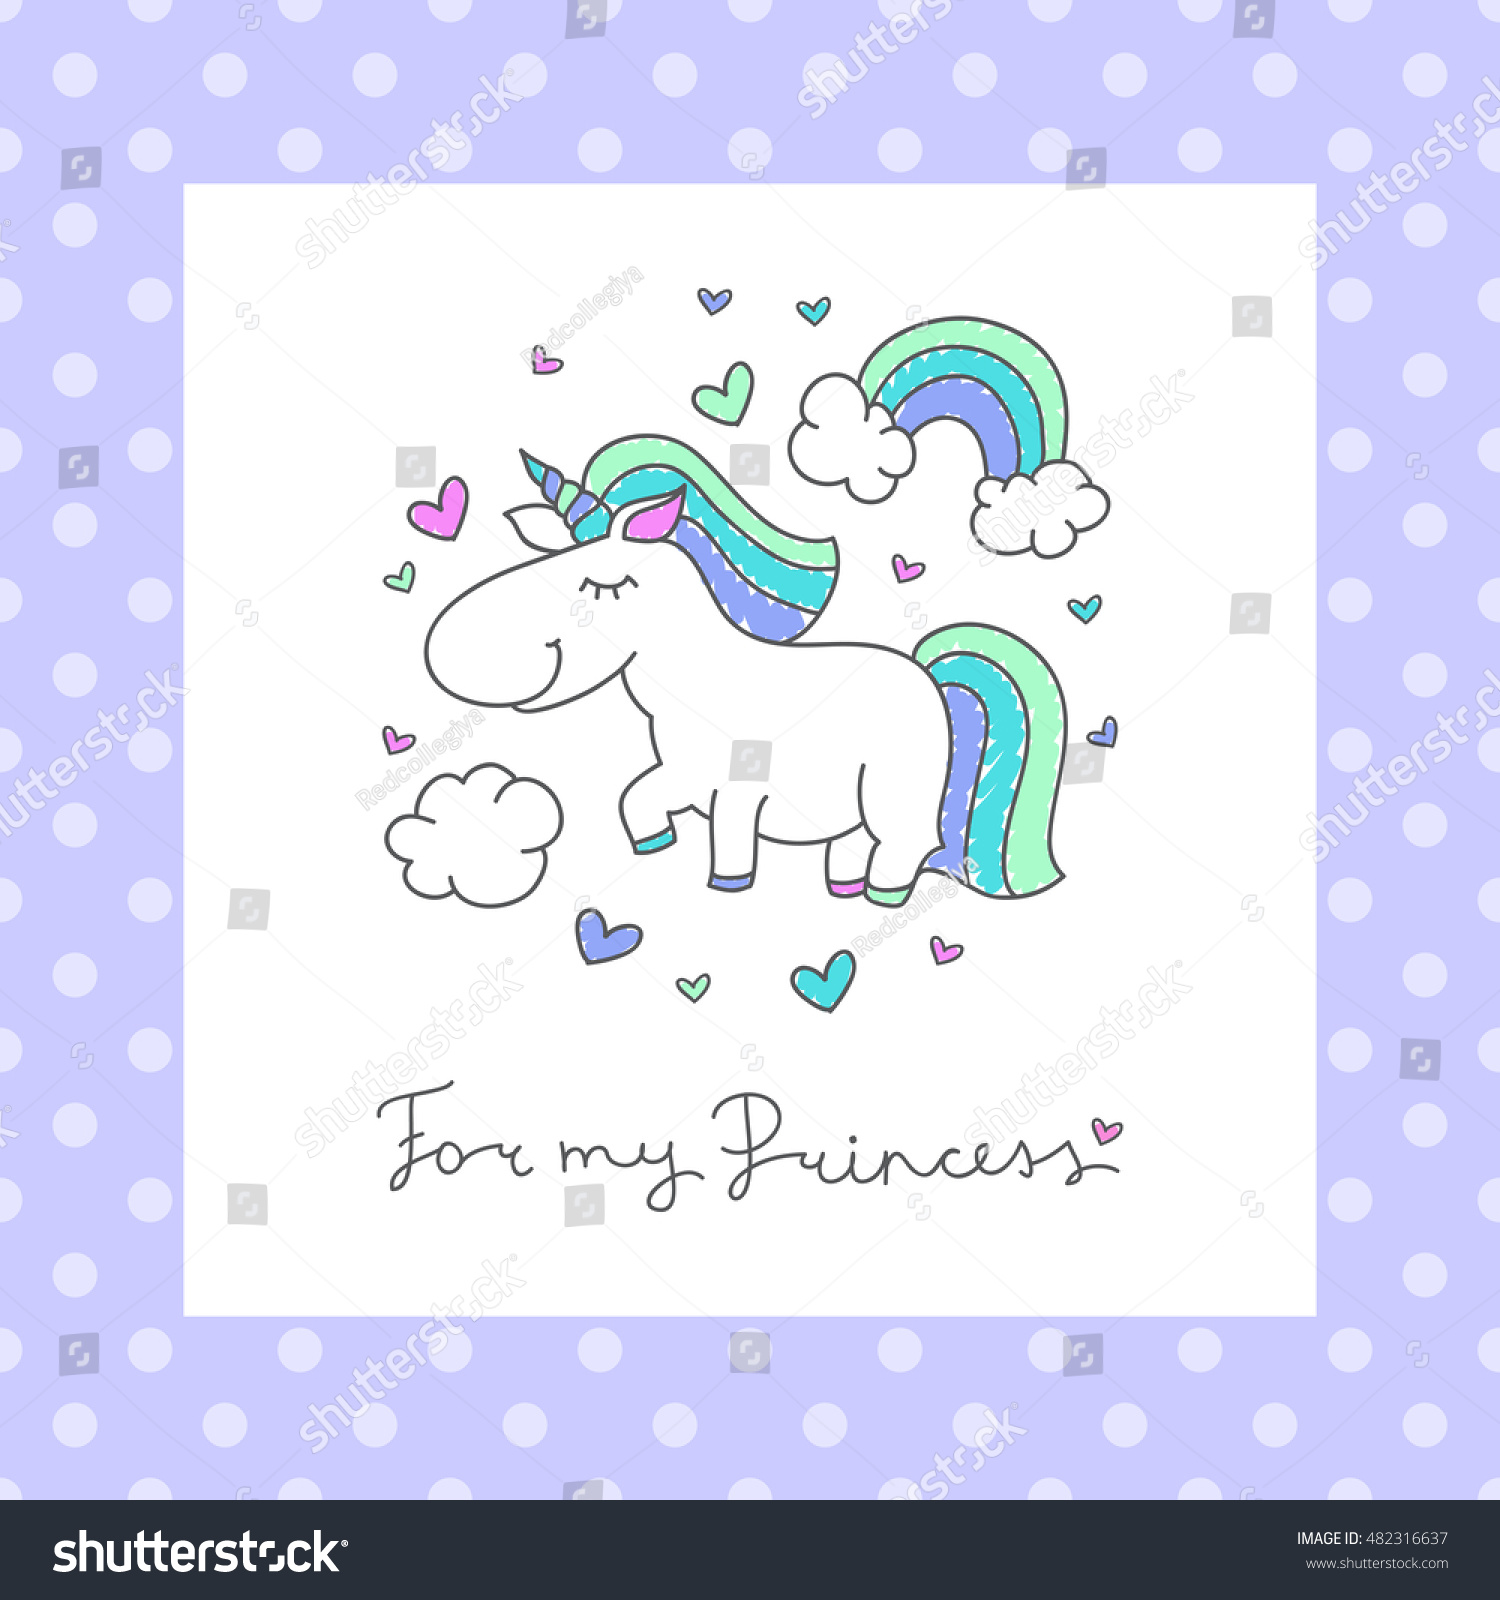 SVG of vector baby greeting card with unicorn, rainbow and clouds svg